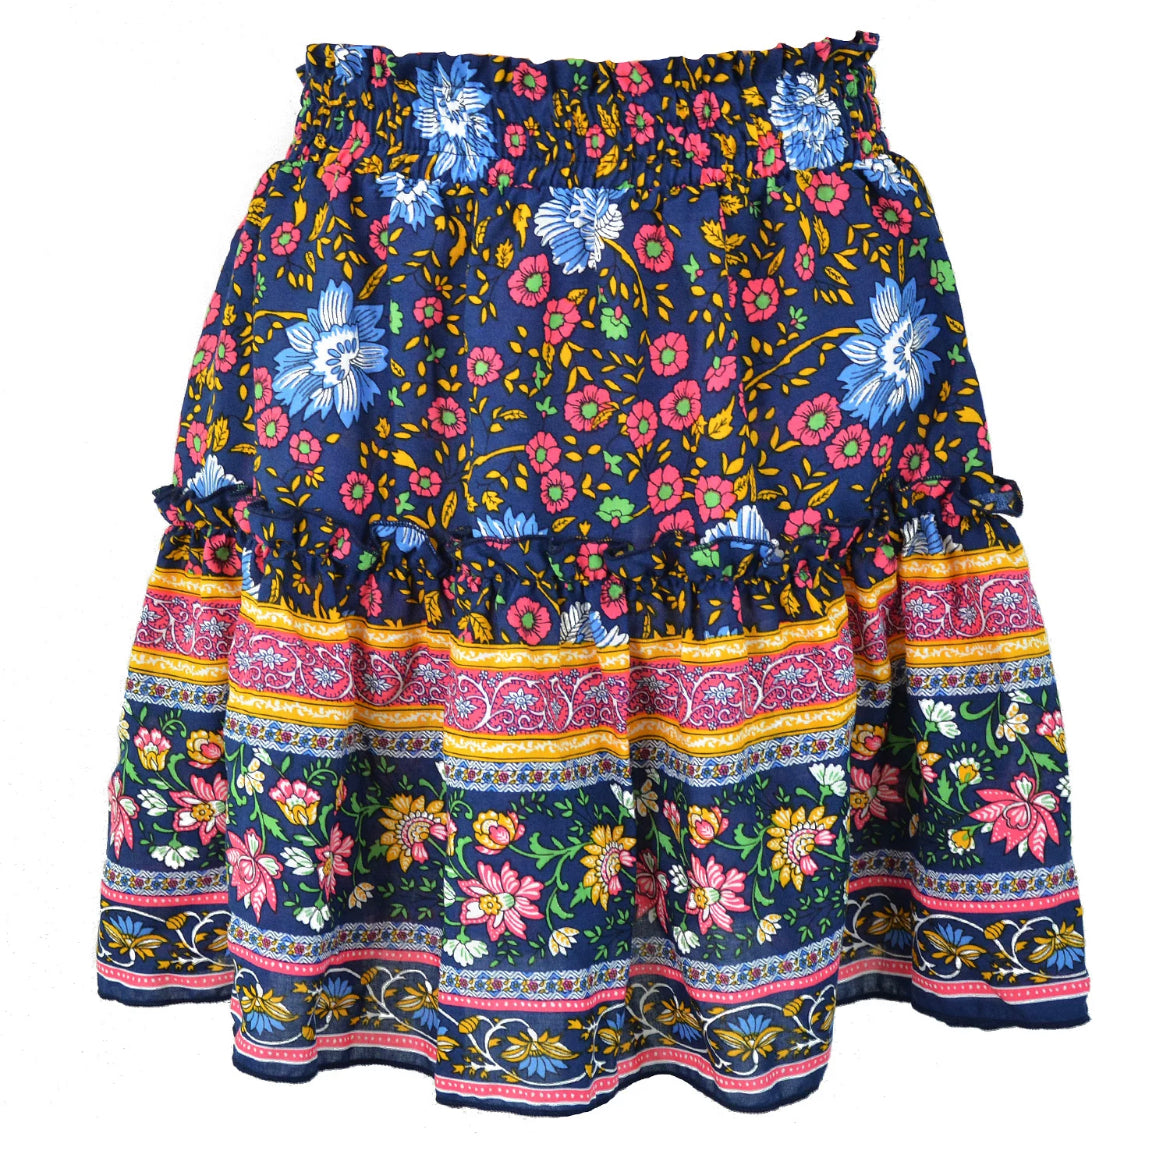 Ladies Floral Mini Skirt Outfit